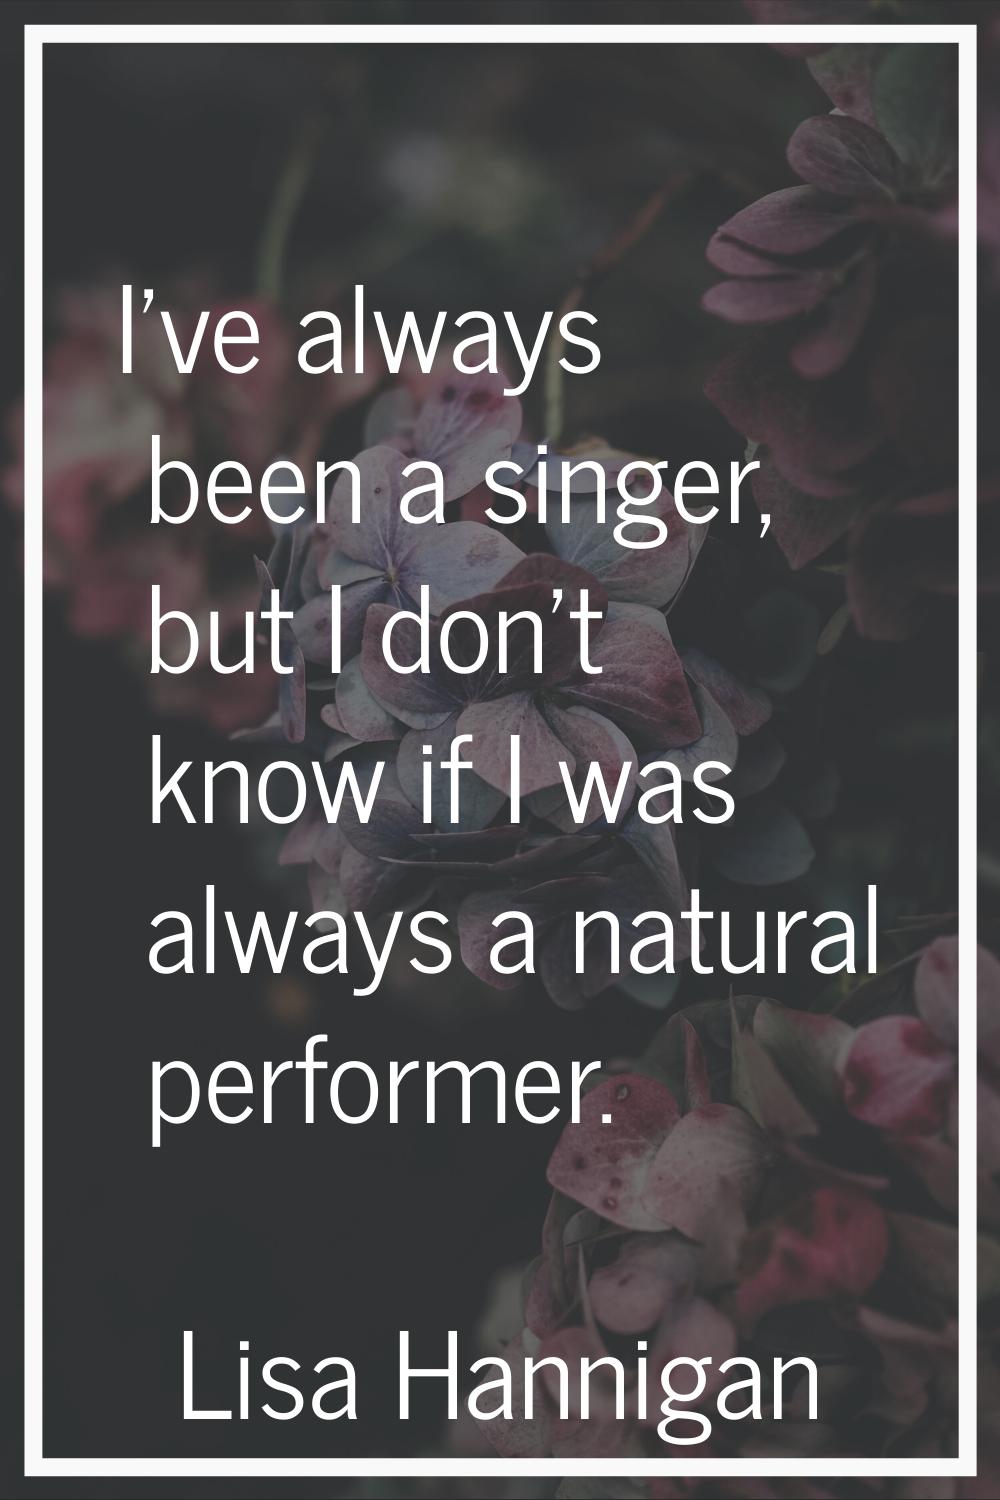 I've always been a singer, but I don't know if I was always a natural performer.